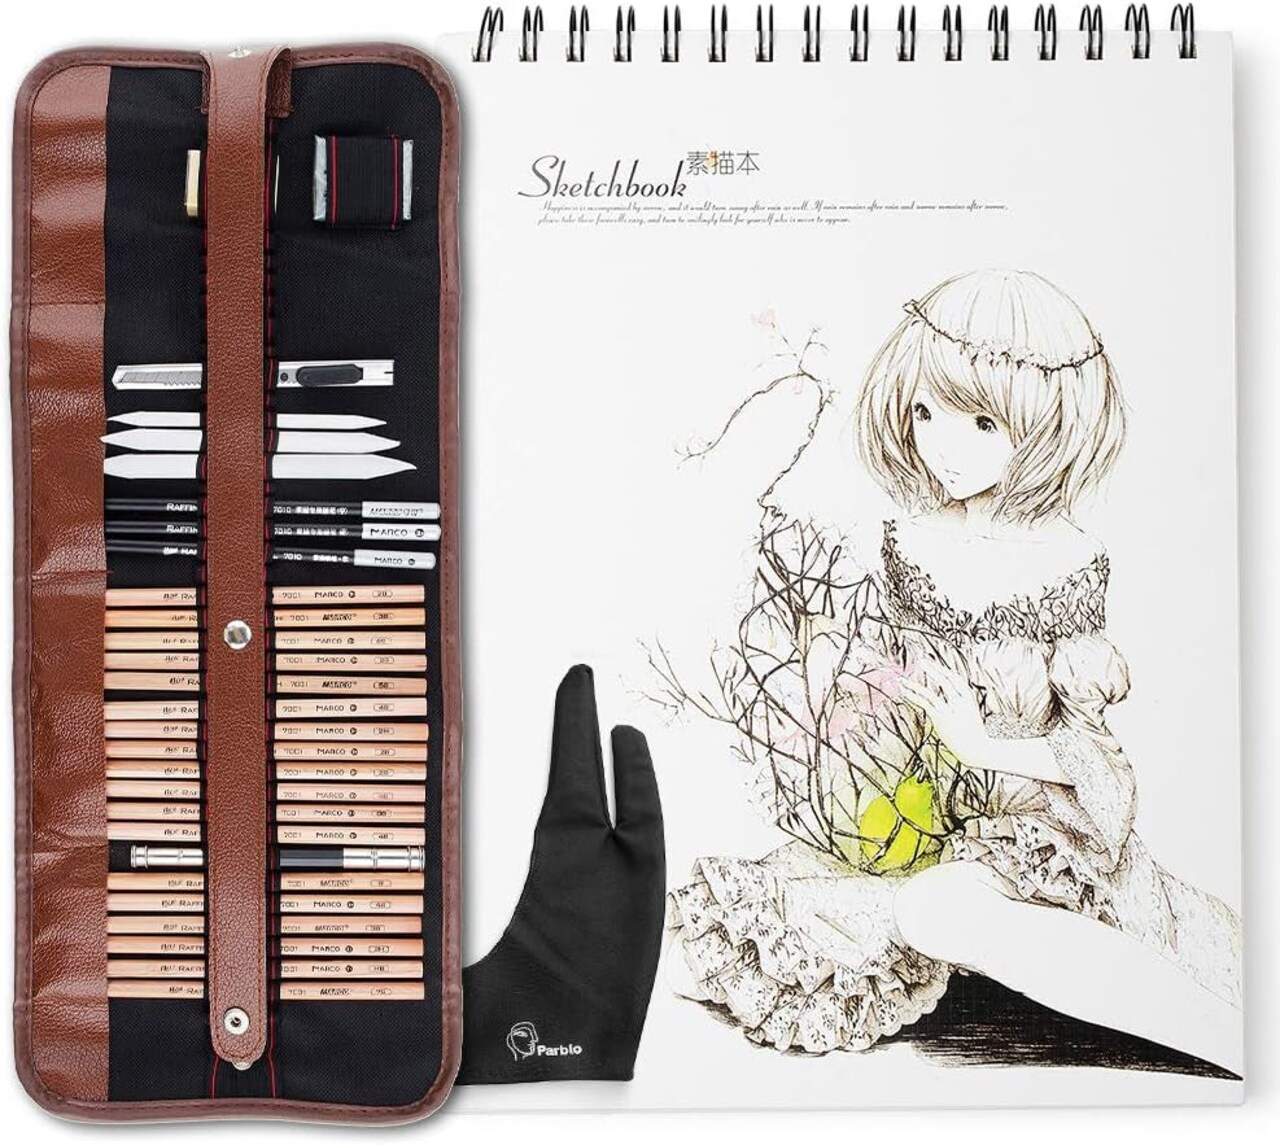 Multifunction 50 Pcs Drawing Pencil Set With Sketch Book Graphite